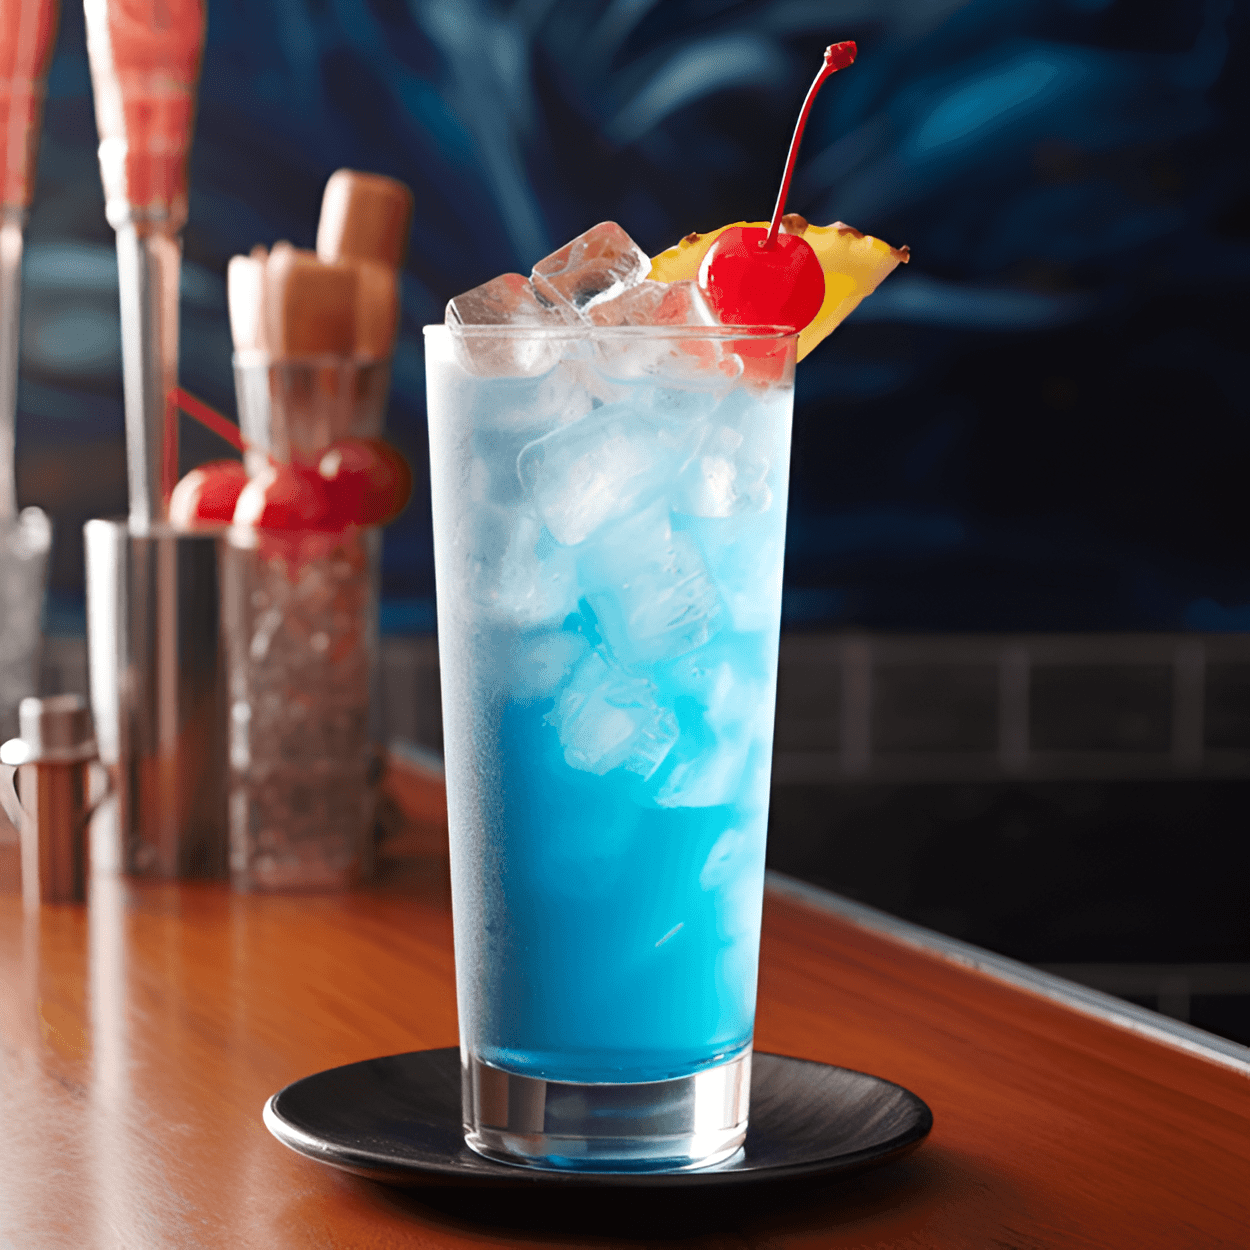 Blue Ocean Cocktail Recipe - The Blue Ocean is a sweet, fruity cocktail with a refreshing tropical taste. The blue curacao gives it a citrusy edge, while the pineapple juice adds a tangy sweetness. The vodka provides a strong, smooth base that balances the sweetness of the other ingredients.